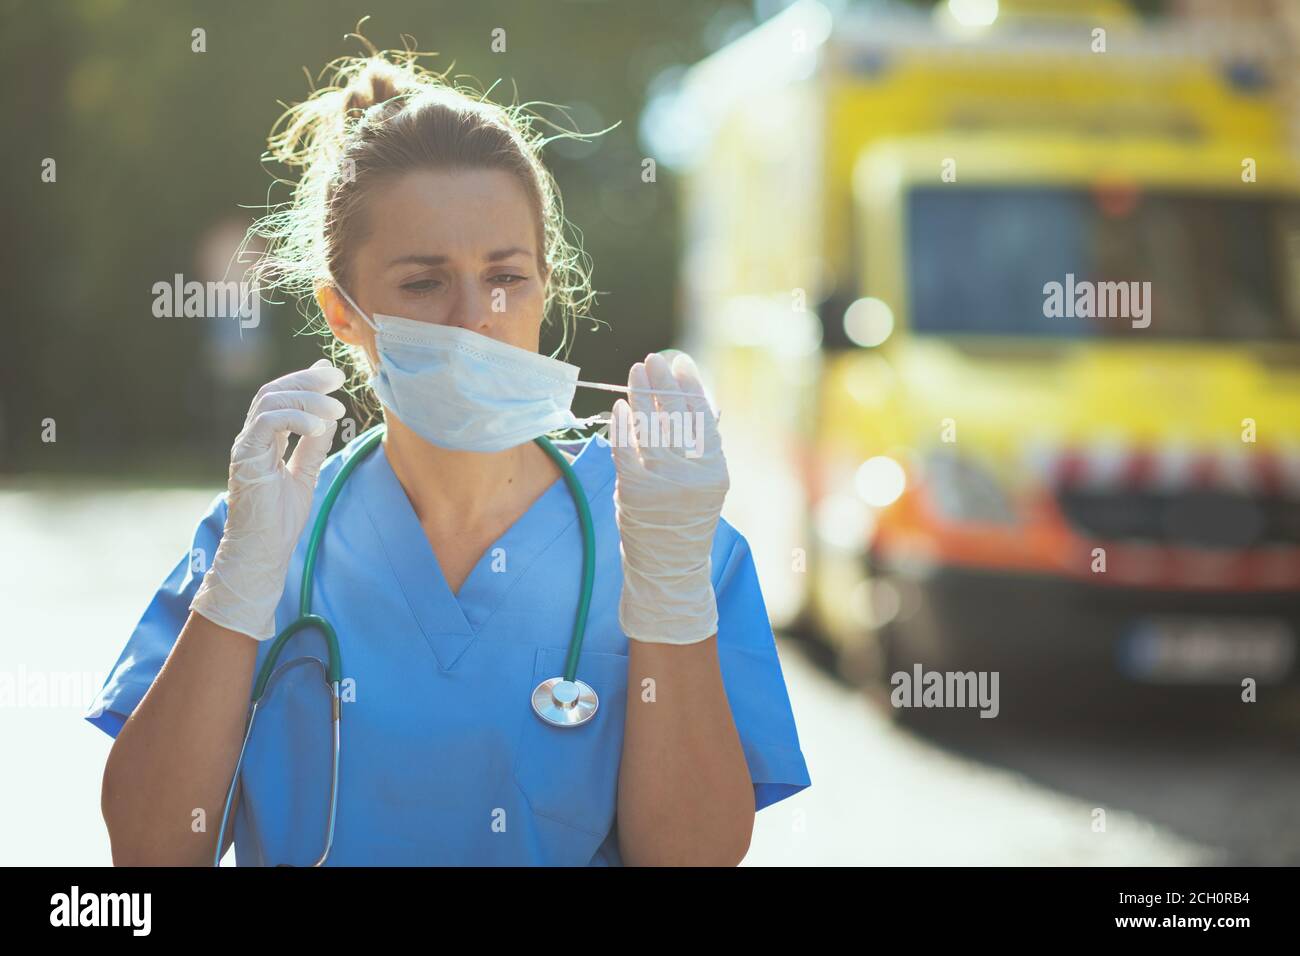 covid-19 pandemic. tired modern medical doctor woman in scrubs with stethoscope and medical mask outside near ambulance. Stock Photo